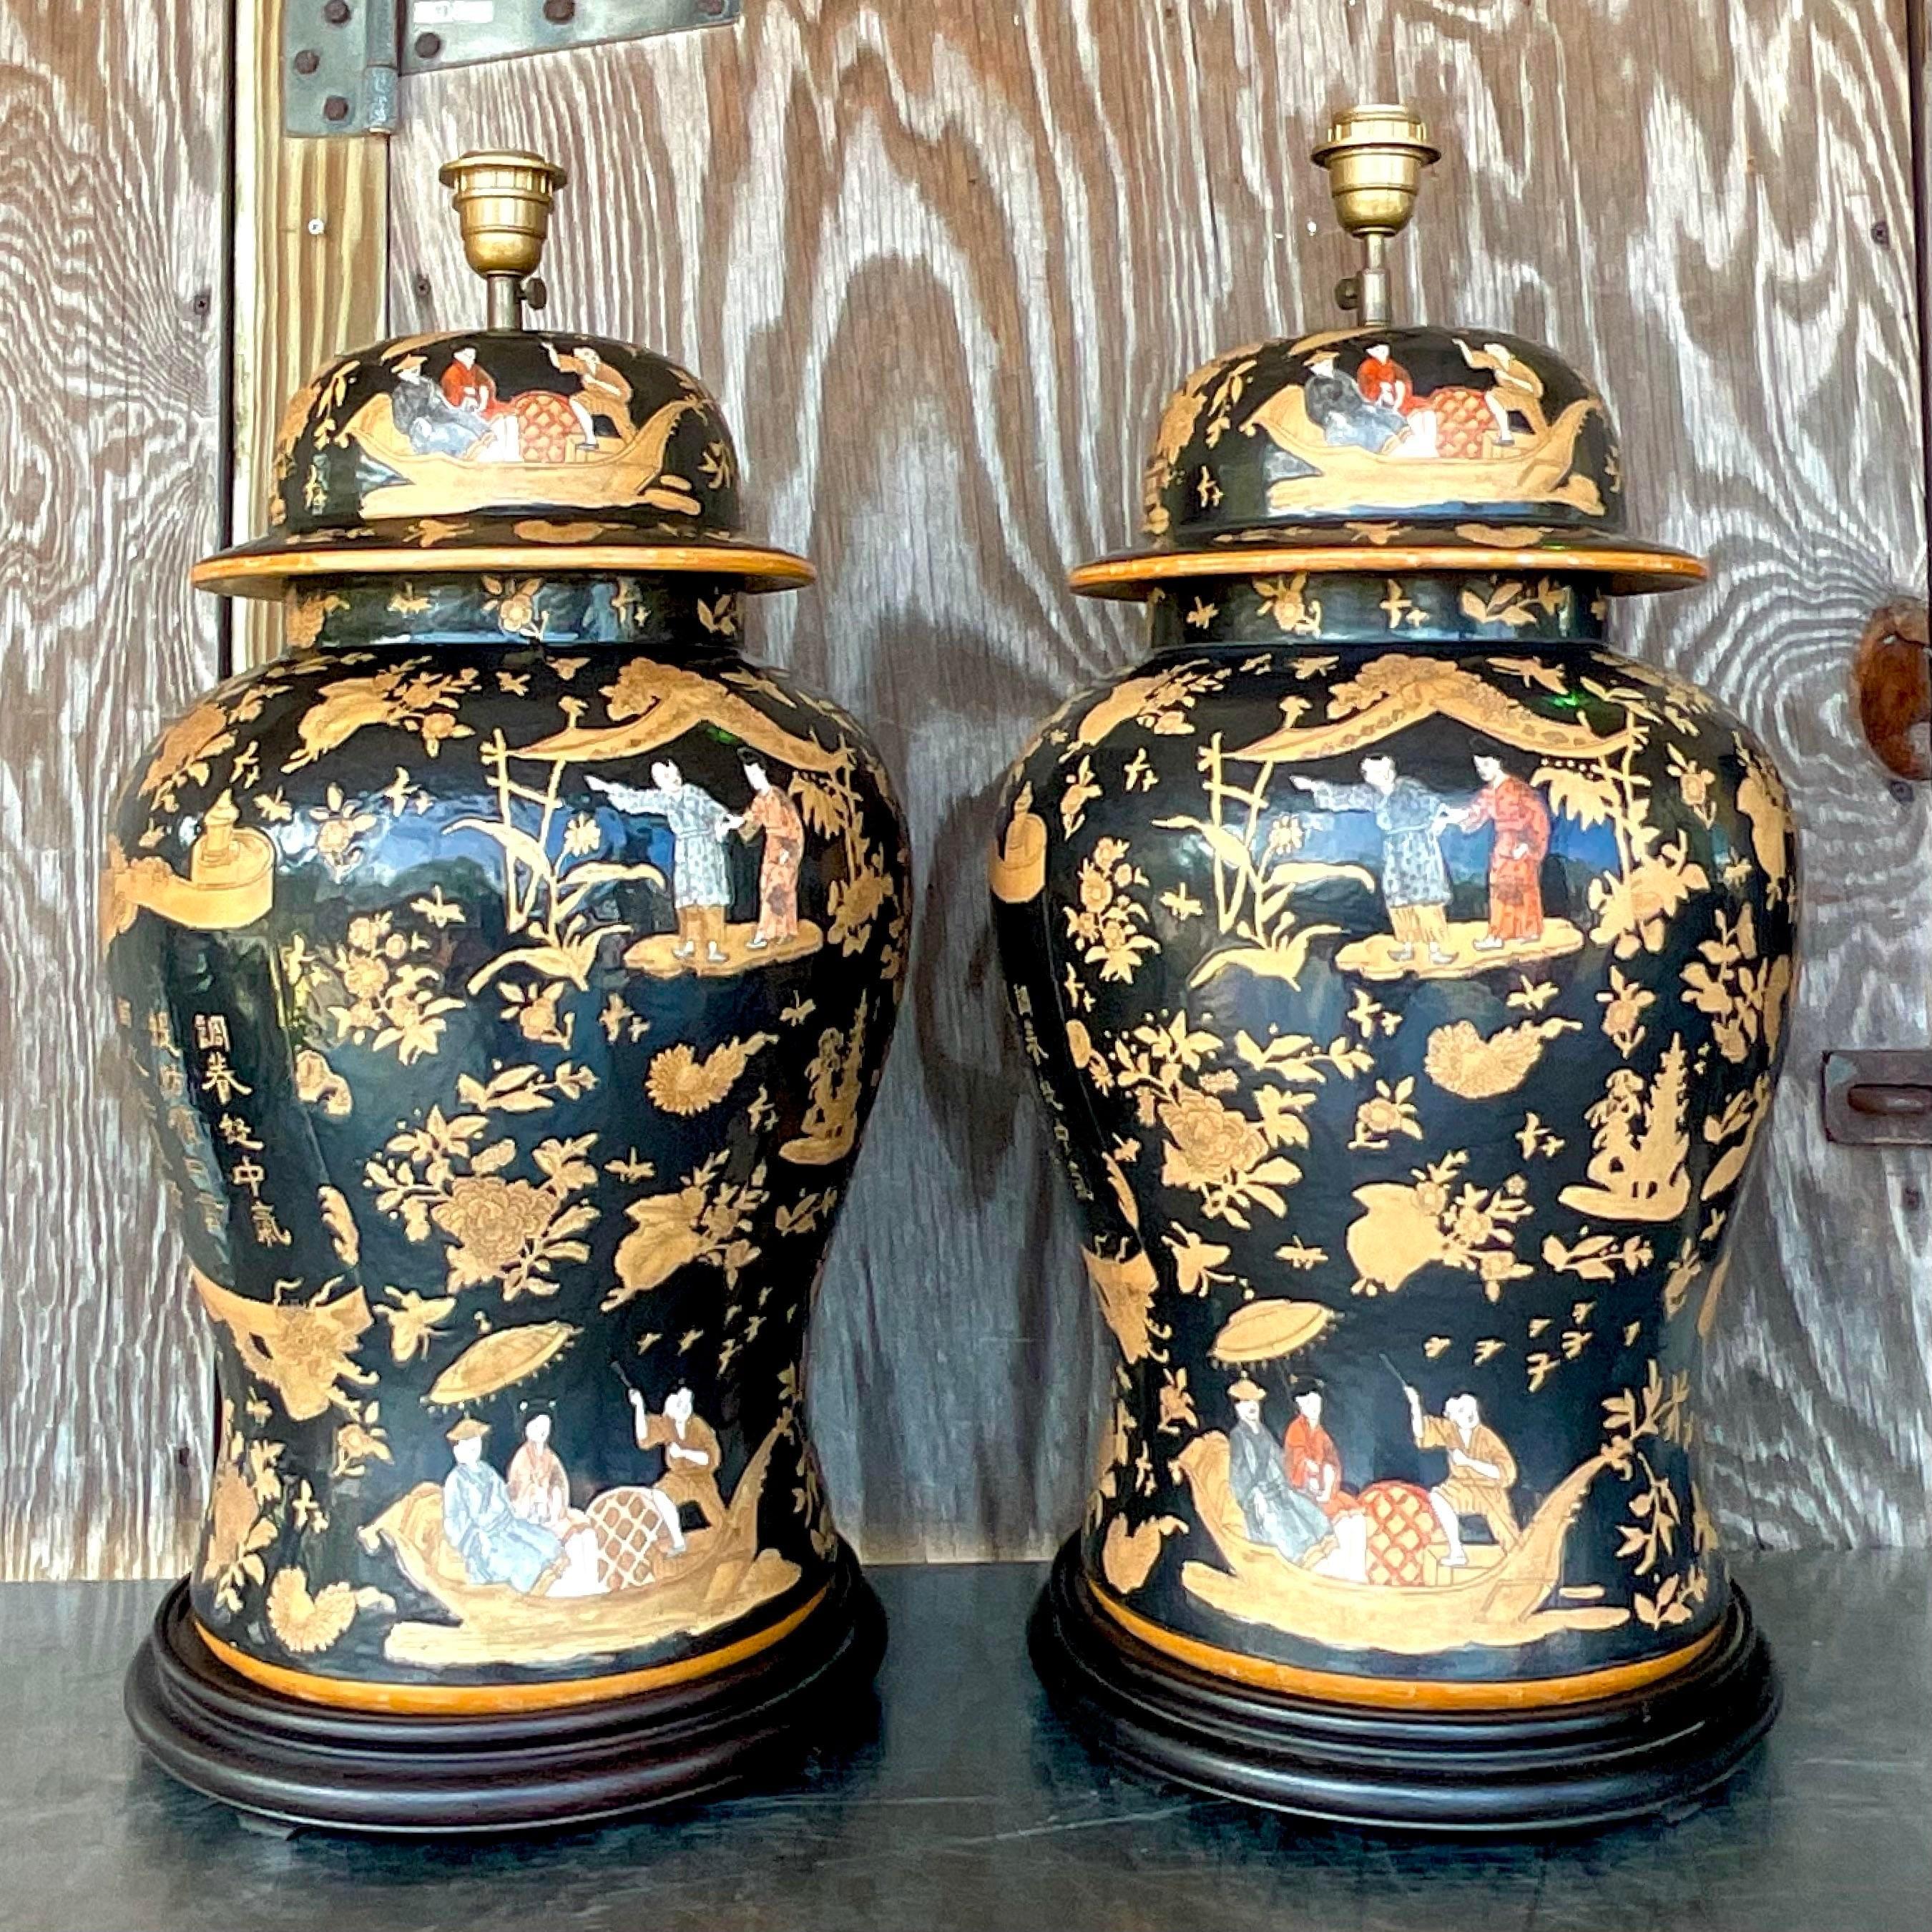 North American Vintage Asian Monumental Chinoiserie Ginger Jars Lamps - a Pair